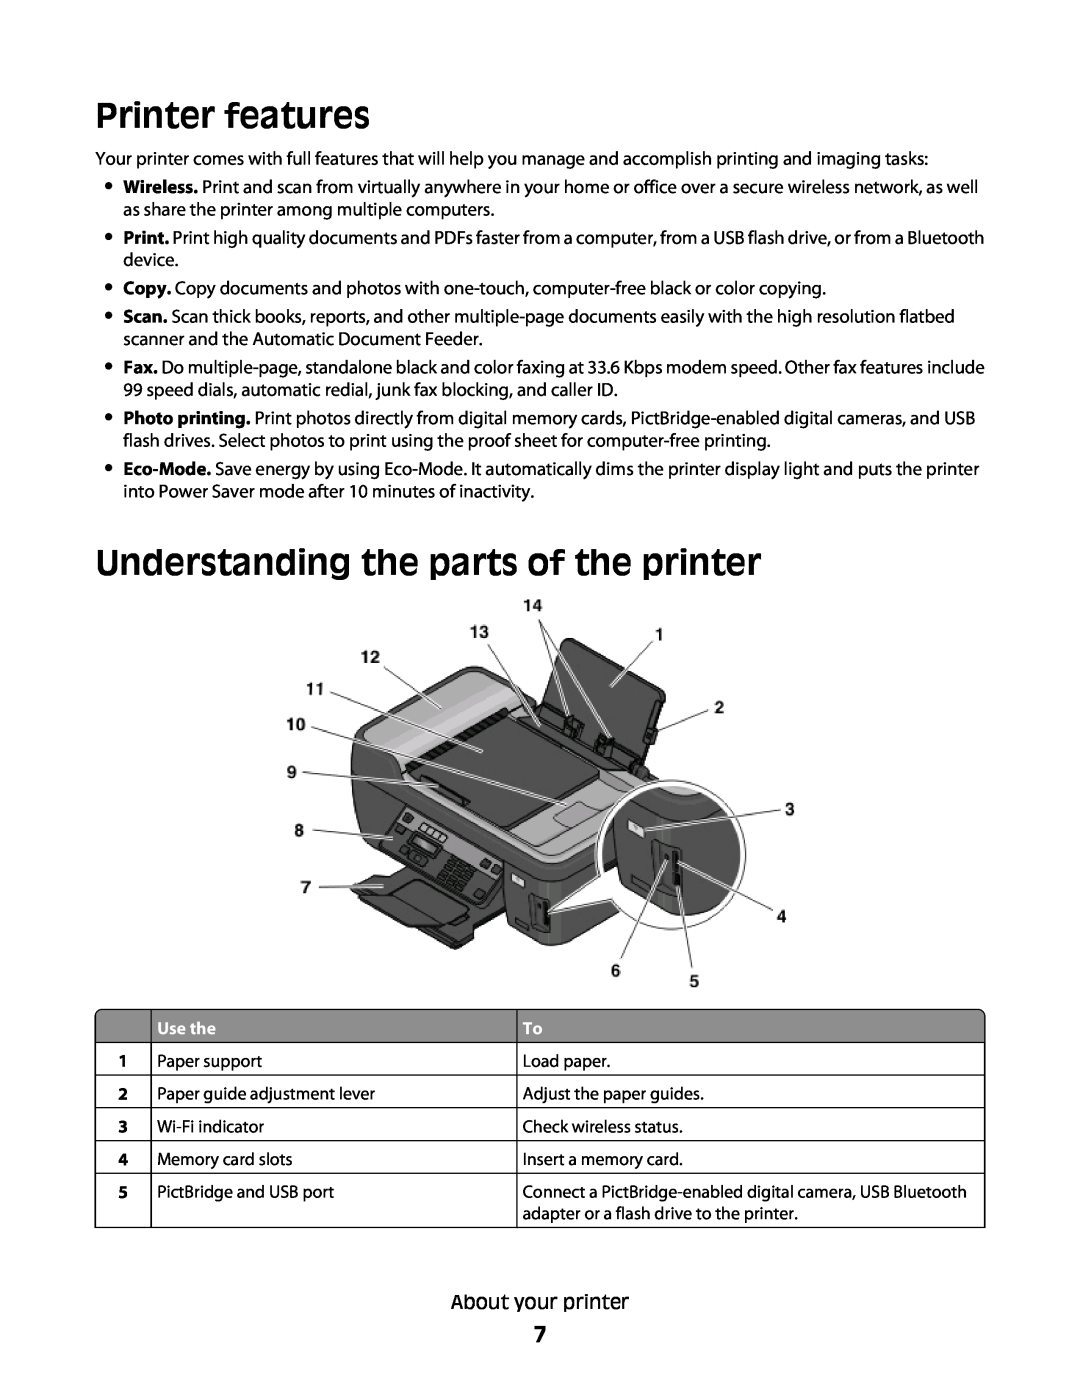 Lexmark S400 manual Printer features, Understanding the parts of the printer, Use the 